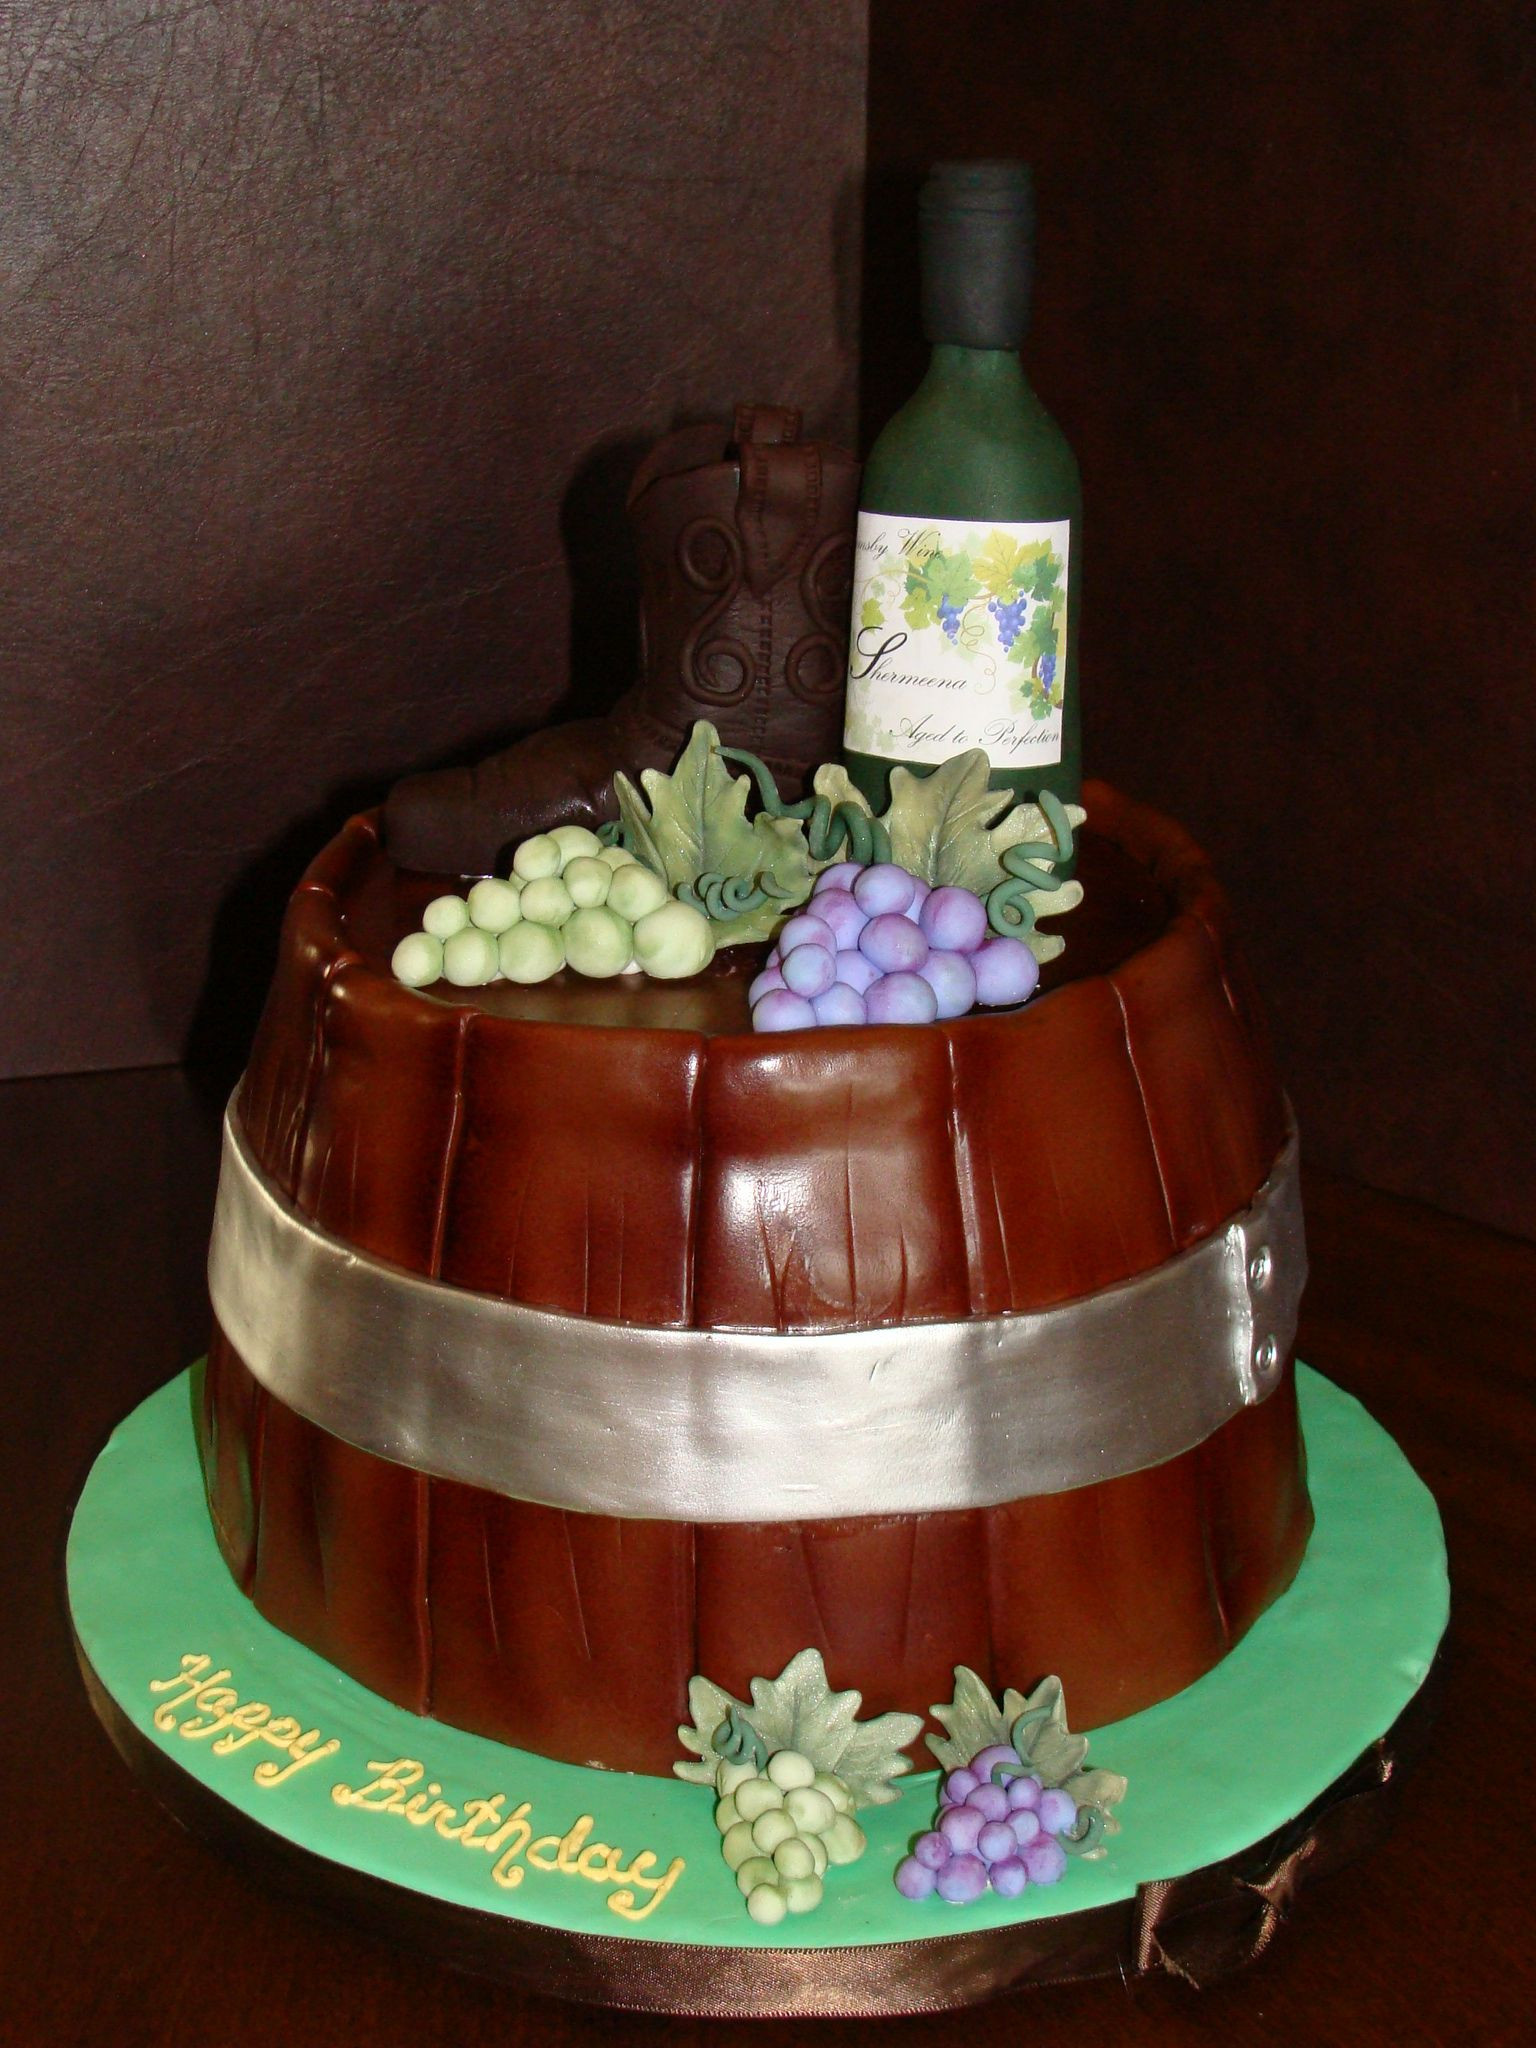 Birthday Cake Vineyards
 A little wine for a birthday surprise Sculpted carrot